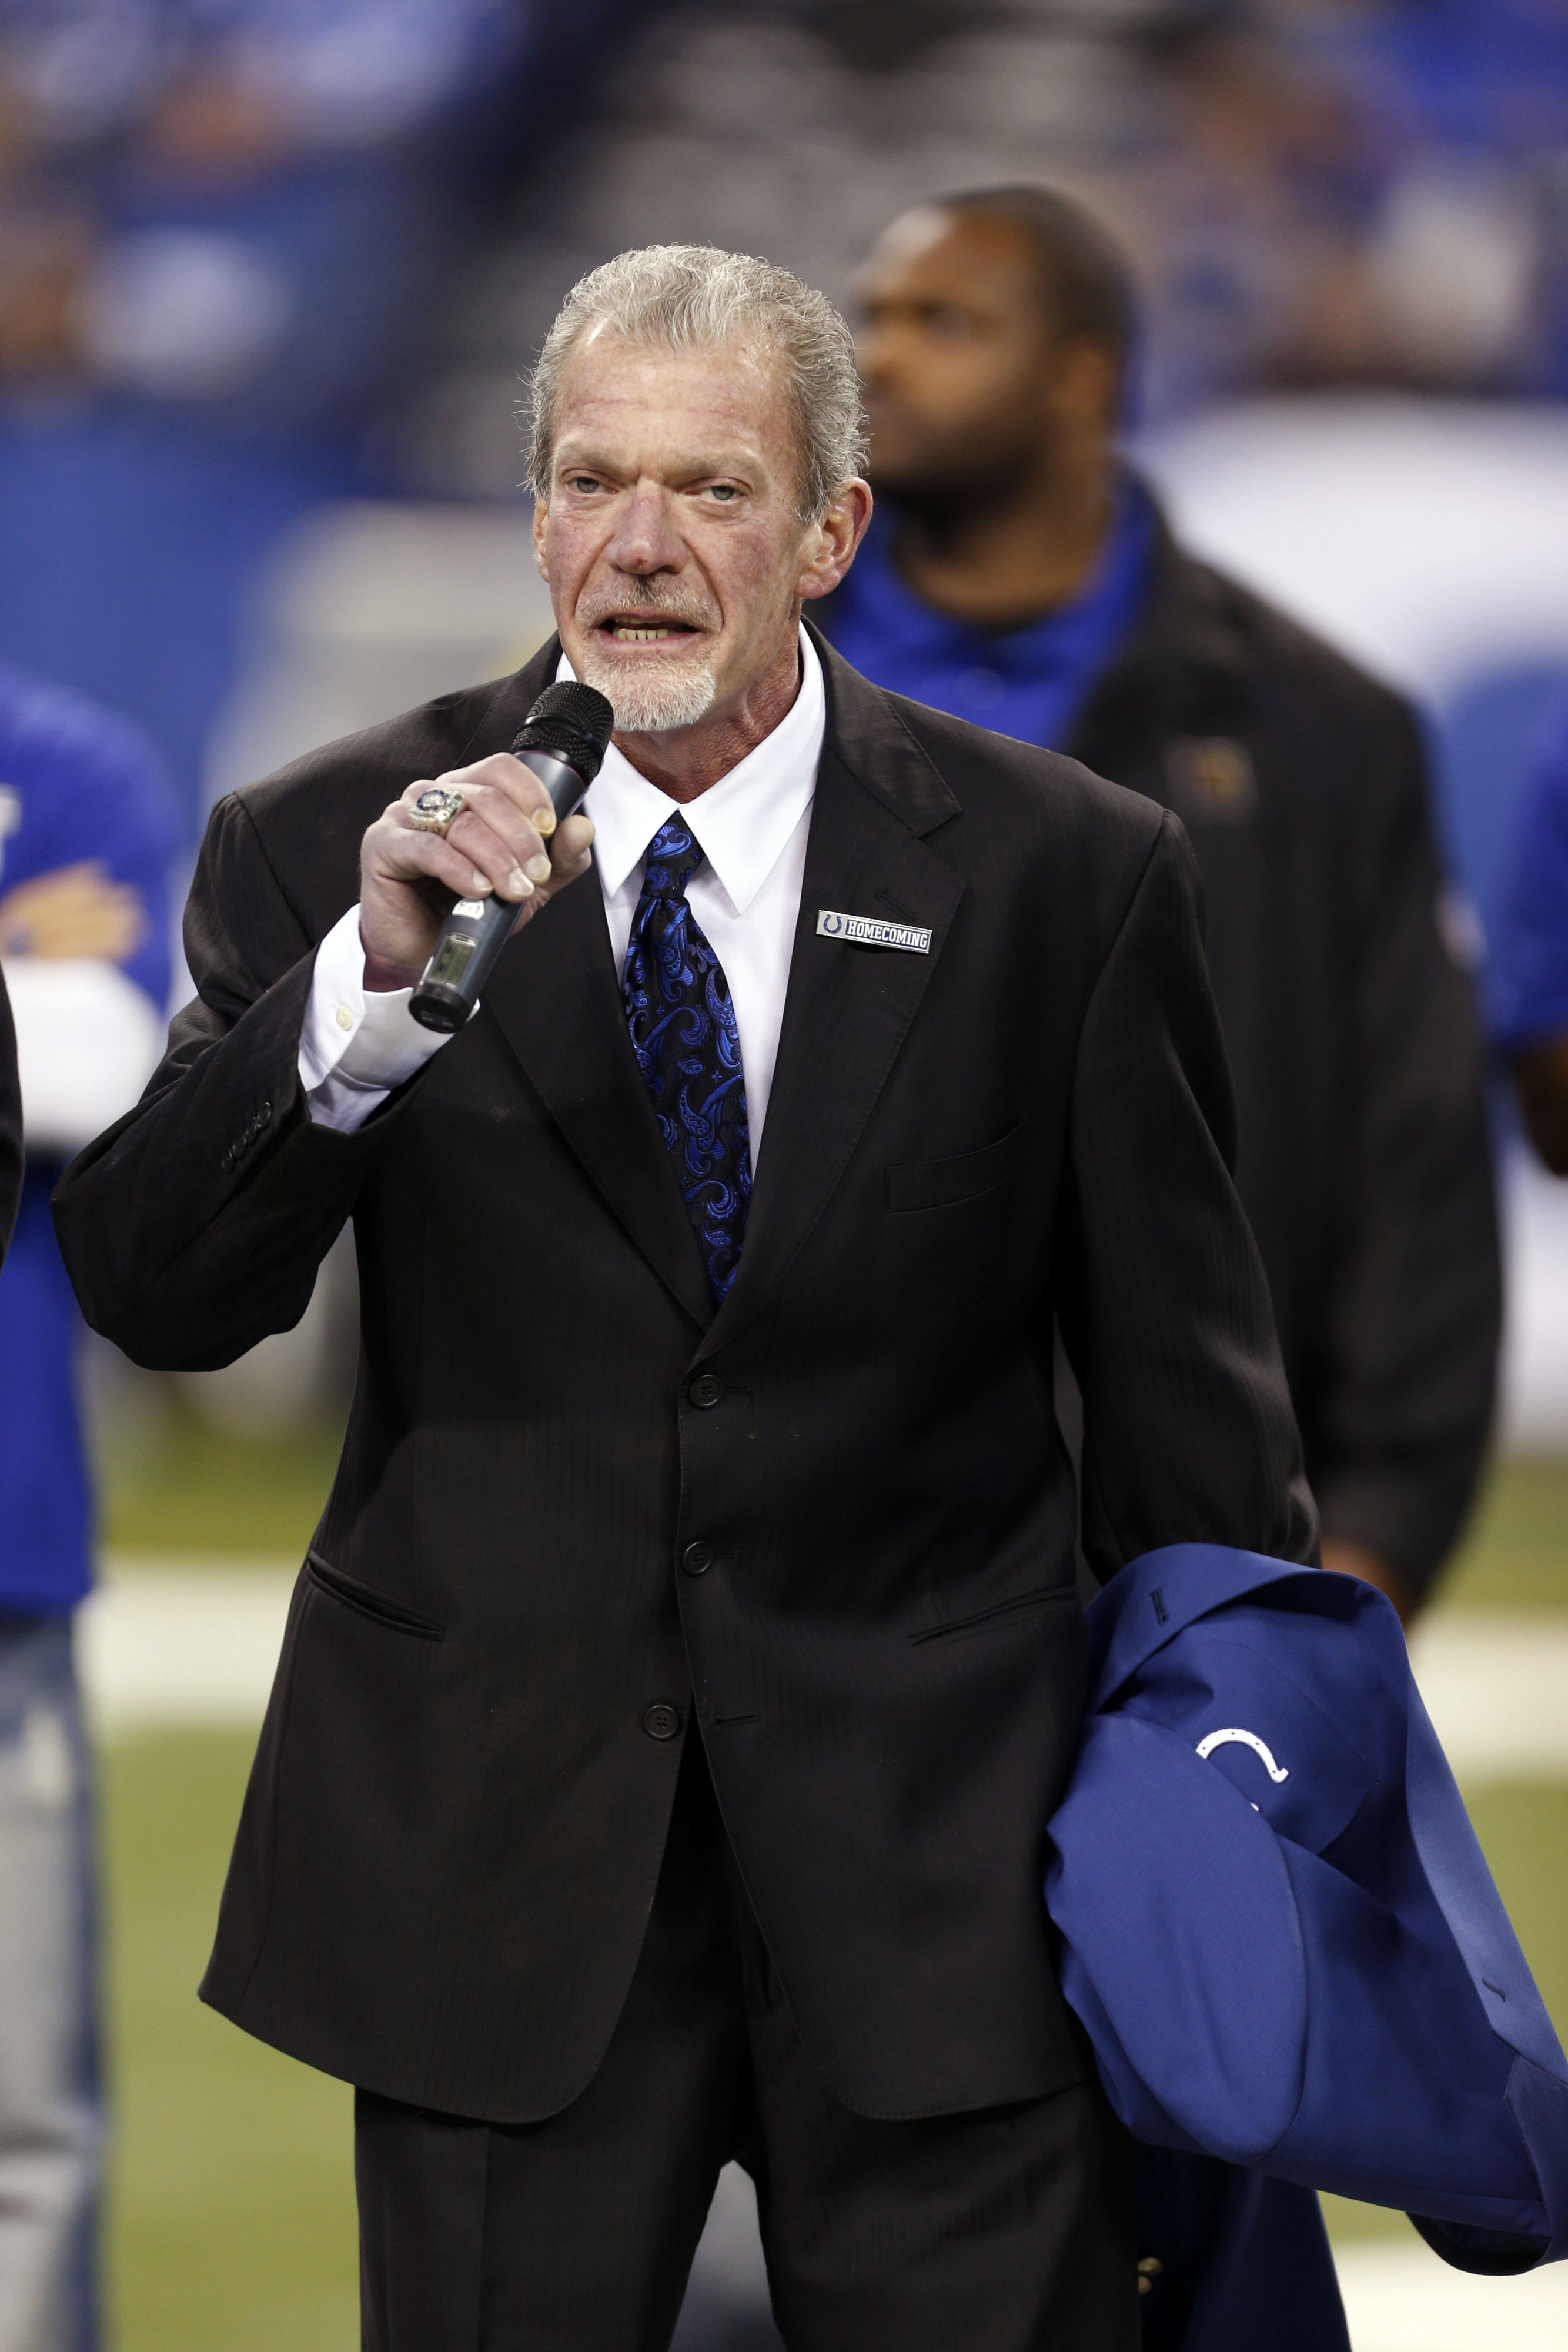 If you think Jim Irsay is all about social media, then you haven't seen BRB in action.